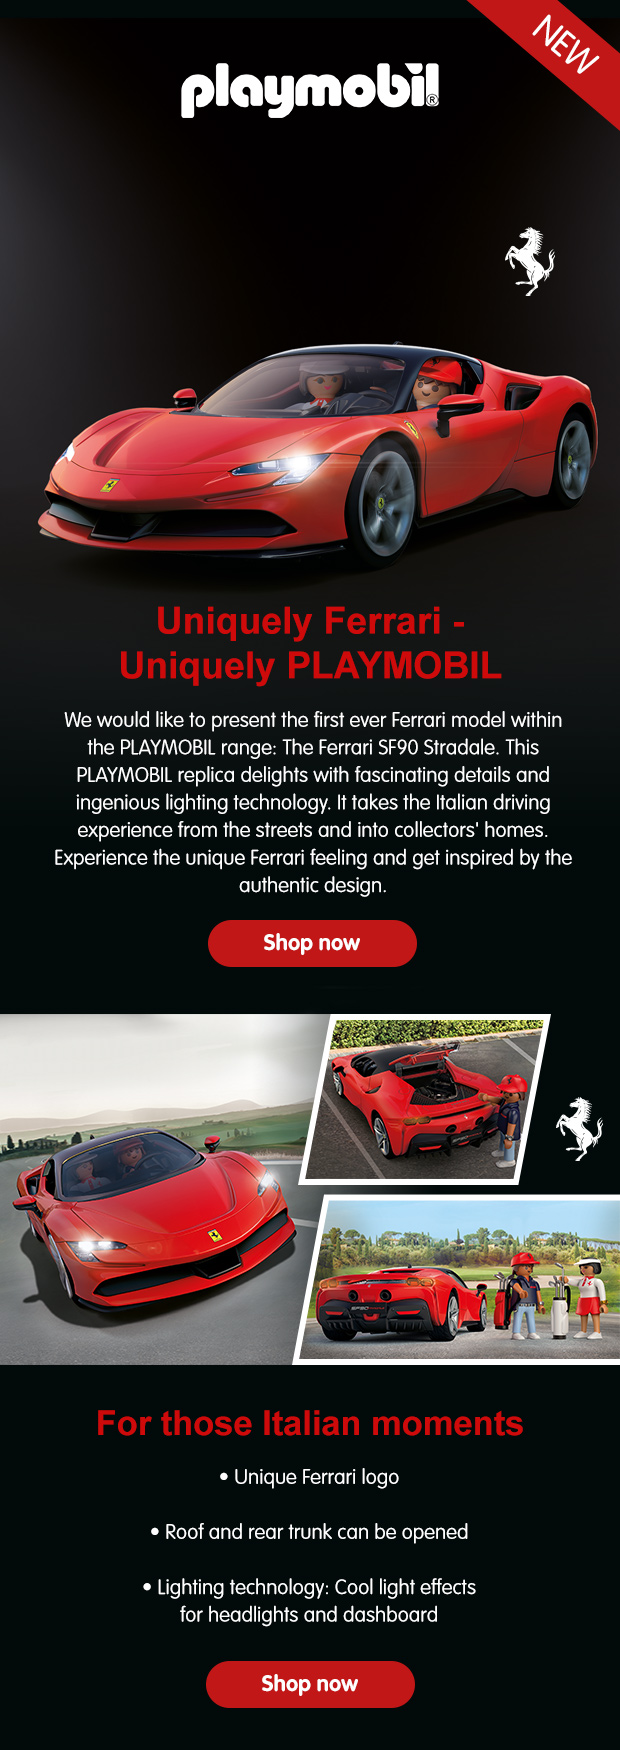 Uniquely Ferrari, Uniquely PLAYMOBIL—The SF90 Stradale as First Ferrari  License of the Iconic Toy - Licensing International